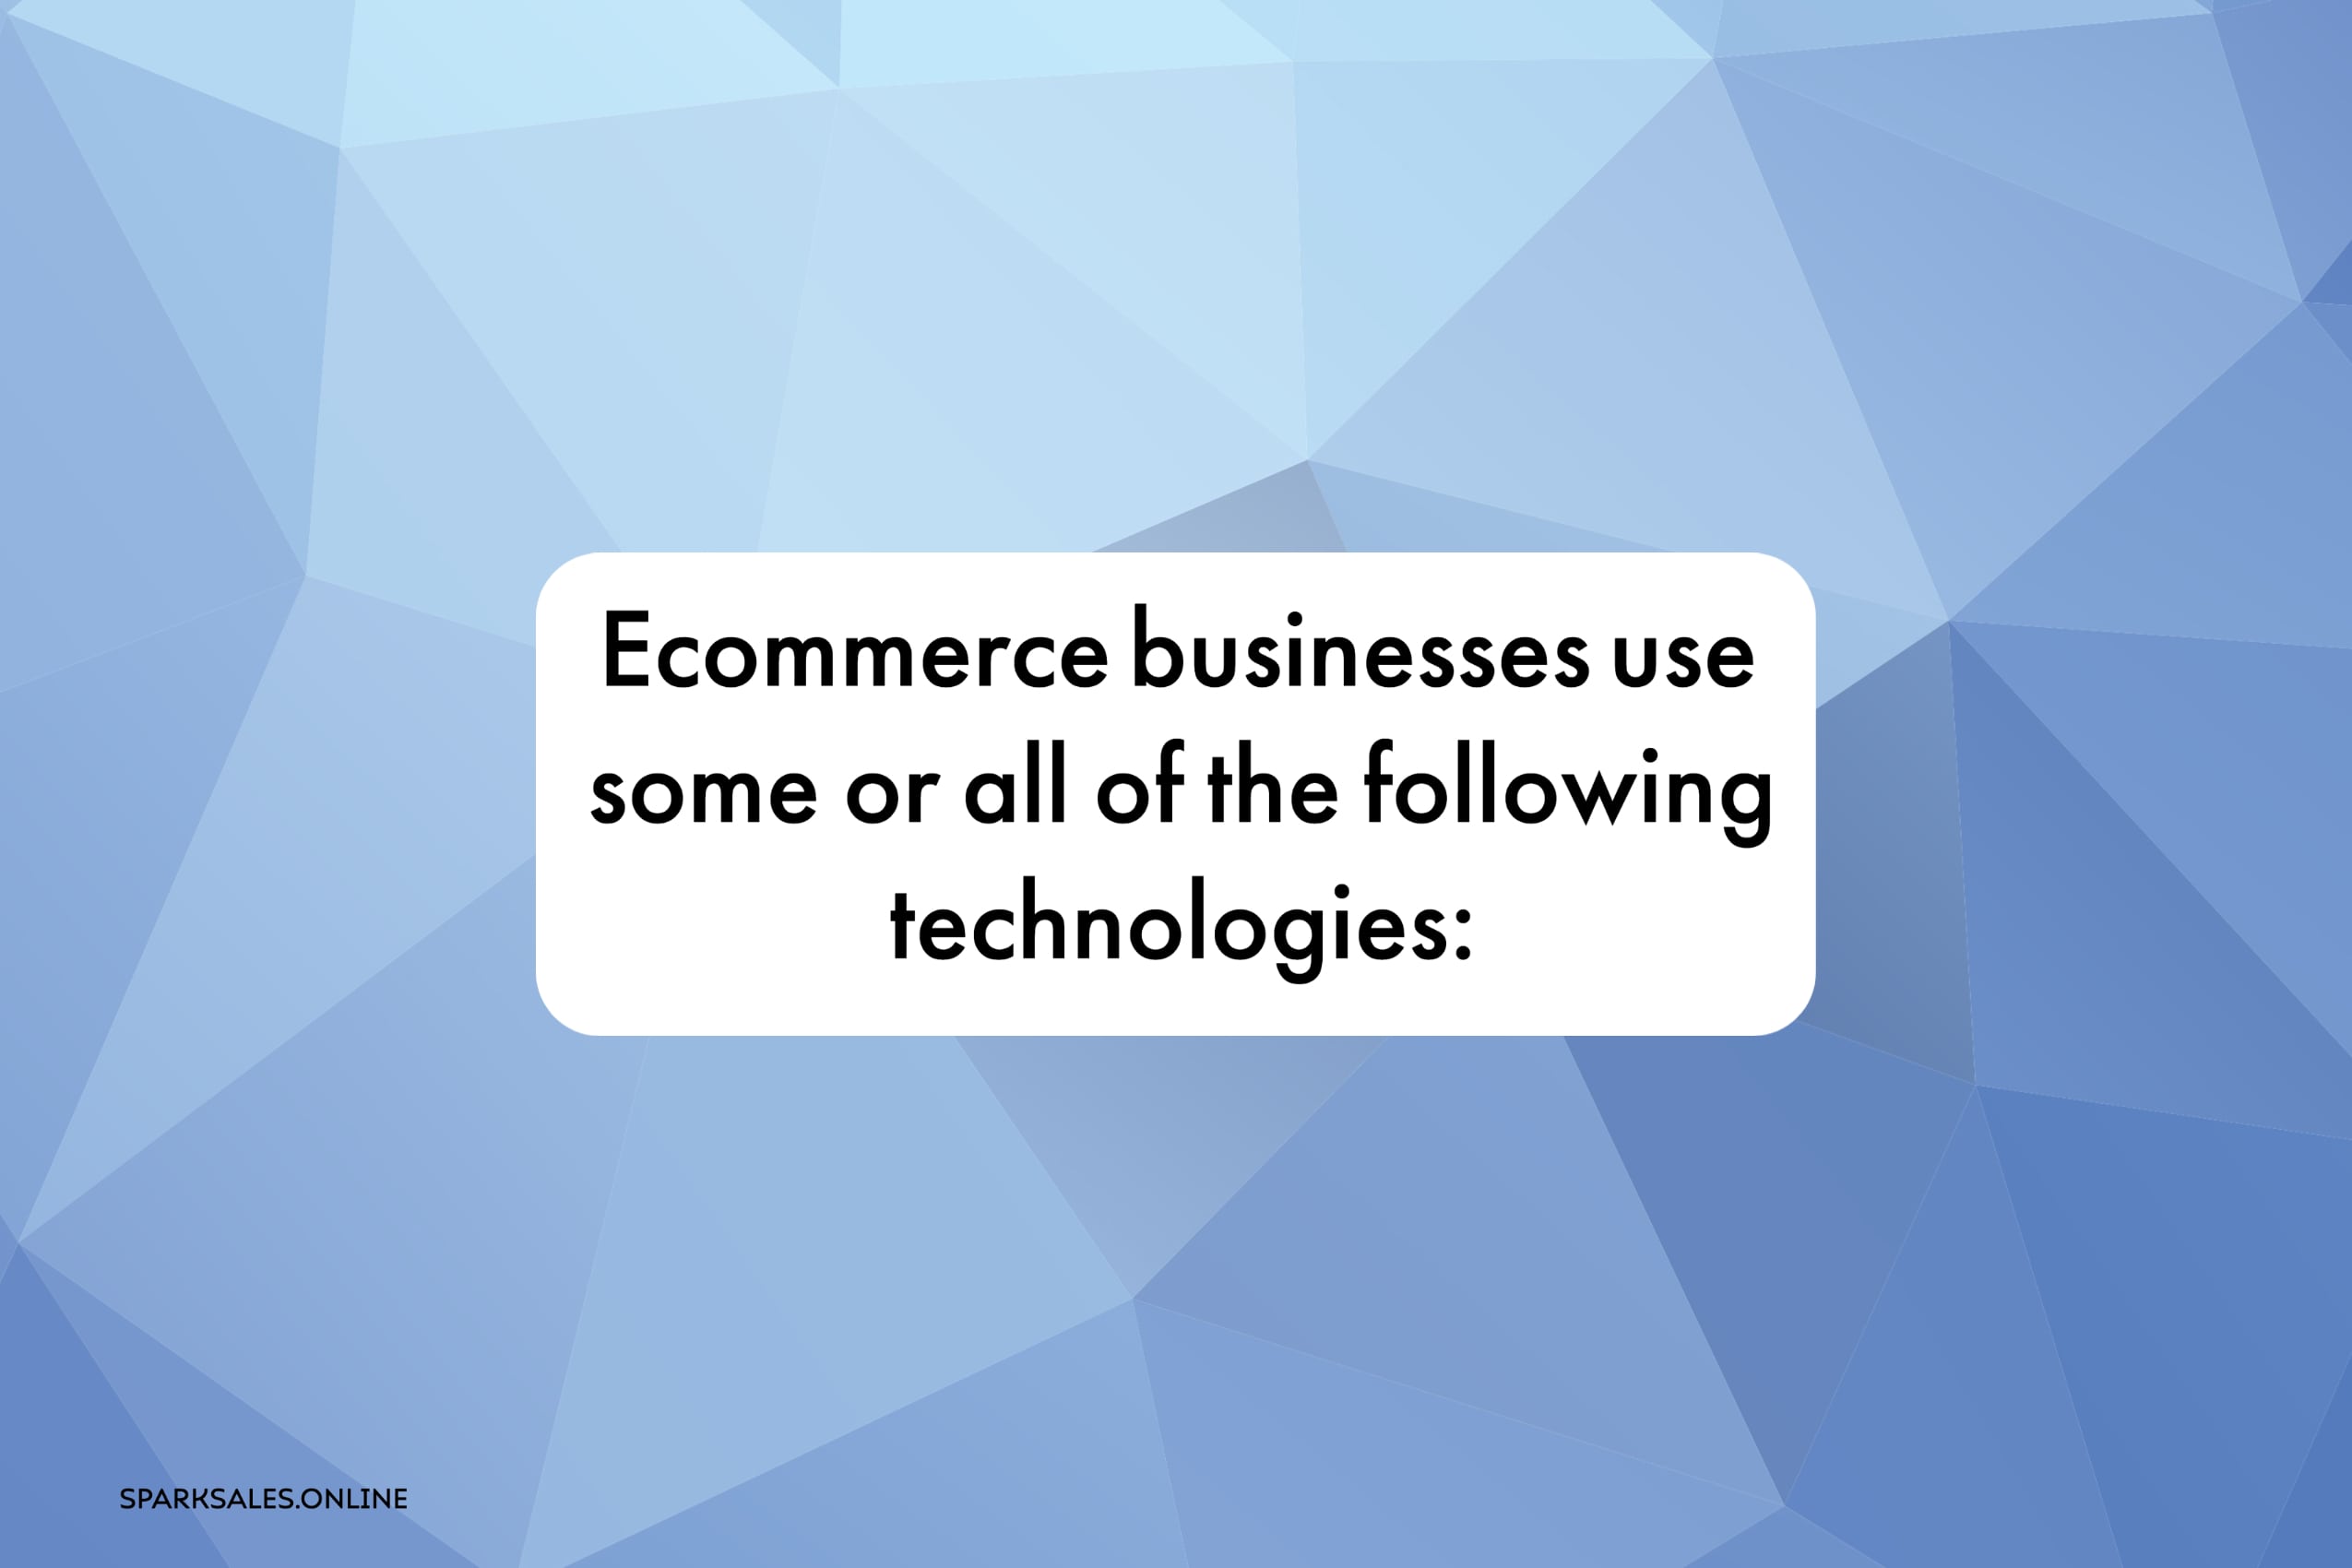 Ecommerce businesses use some or all of the following technologies: